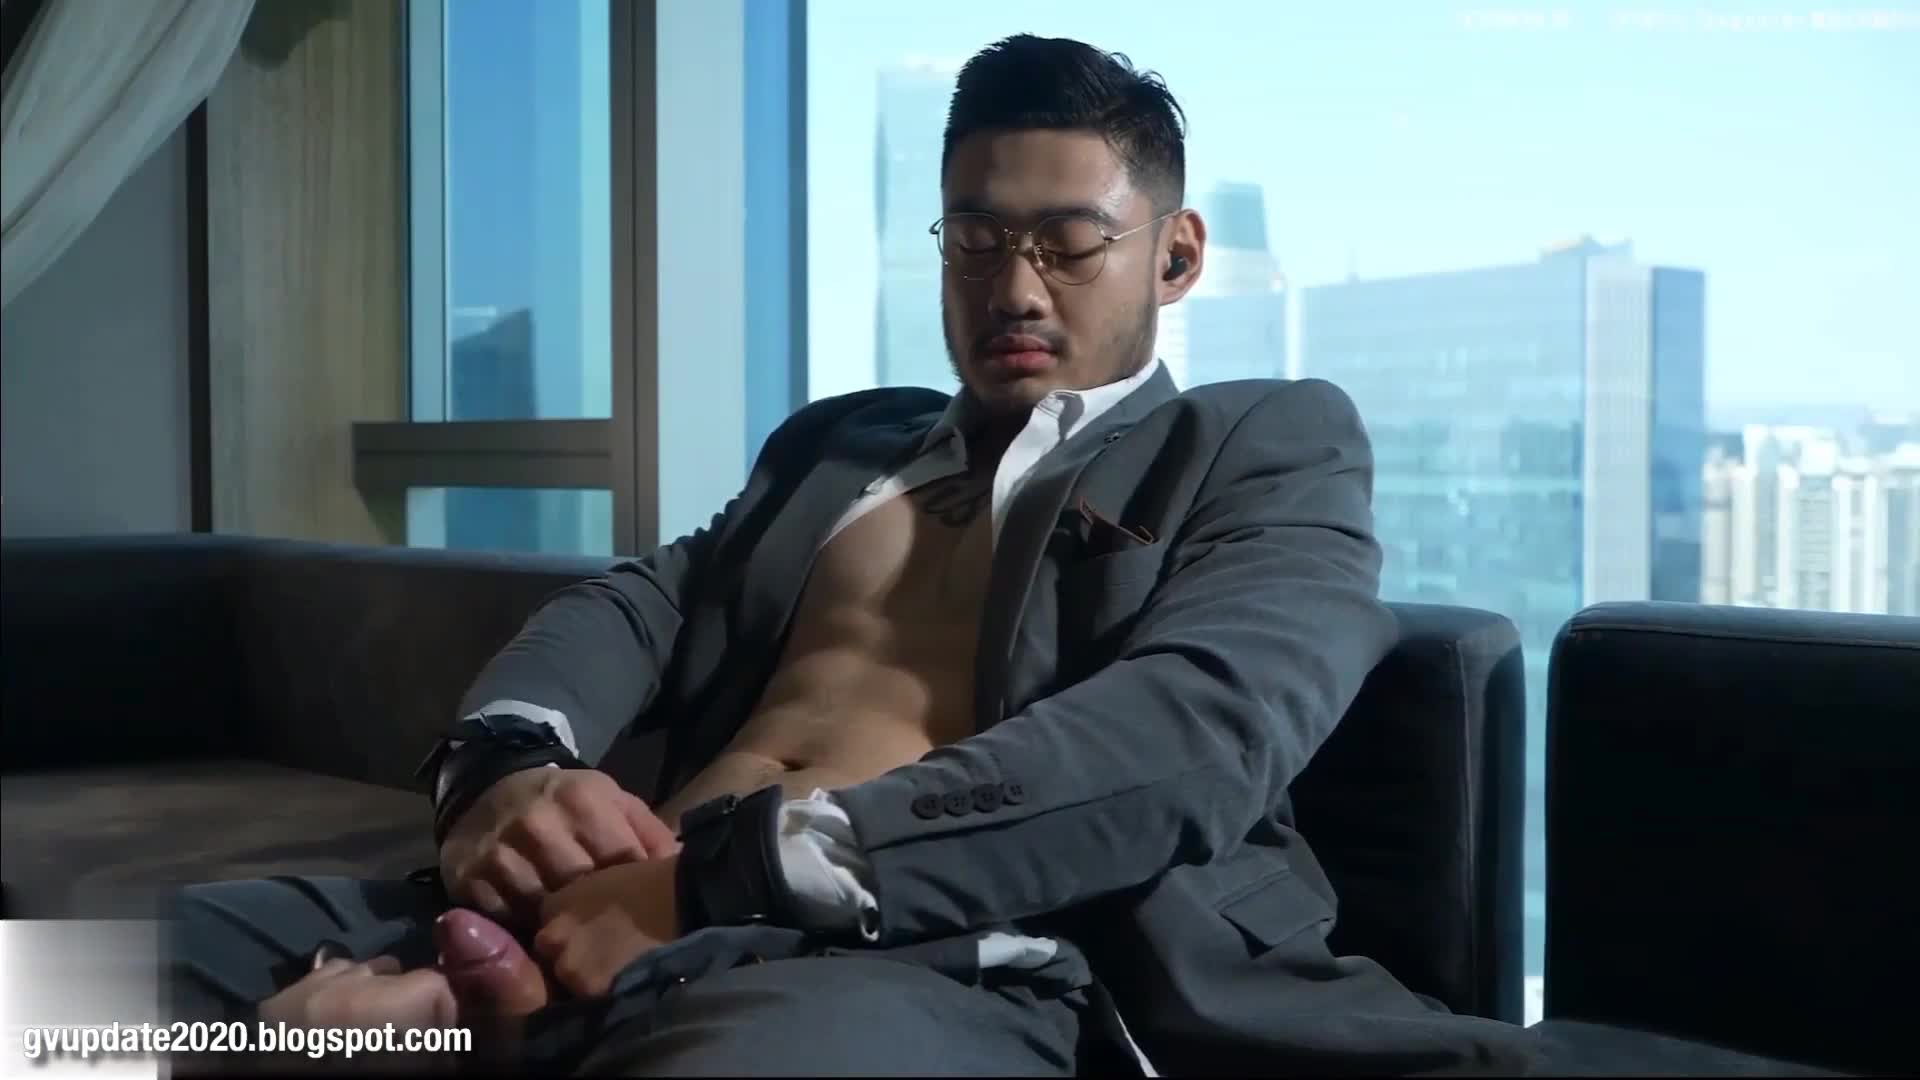 Masculine Hairy Man - Asian Taiwanese Straight Gets A Blowjob For Photoshoot pic